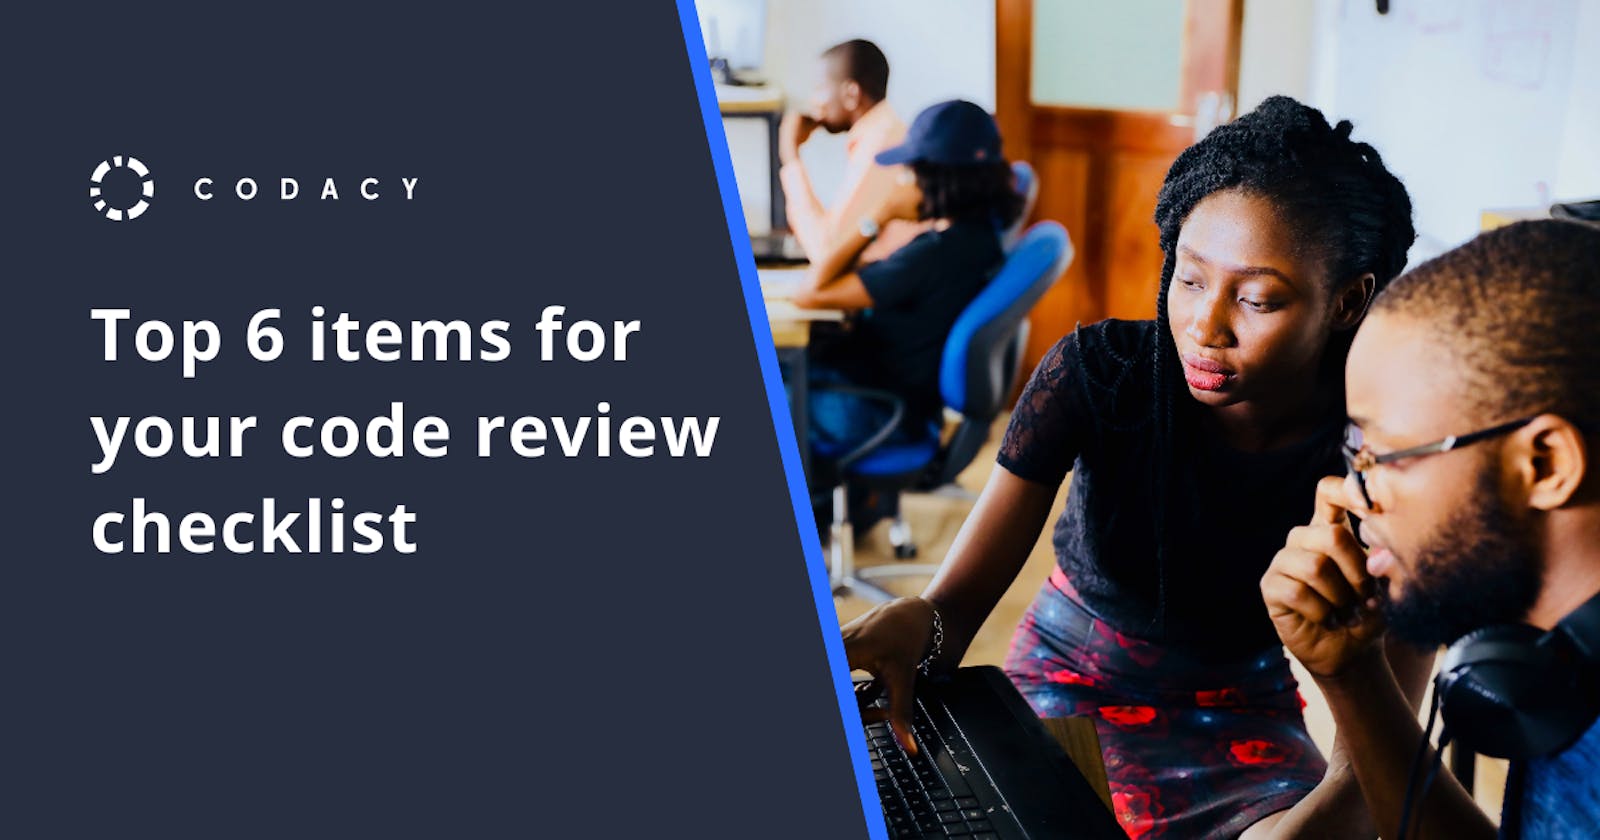 Top 6 items for your code review checklist